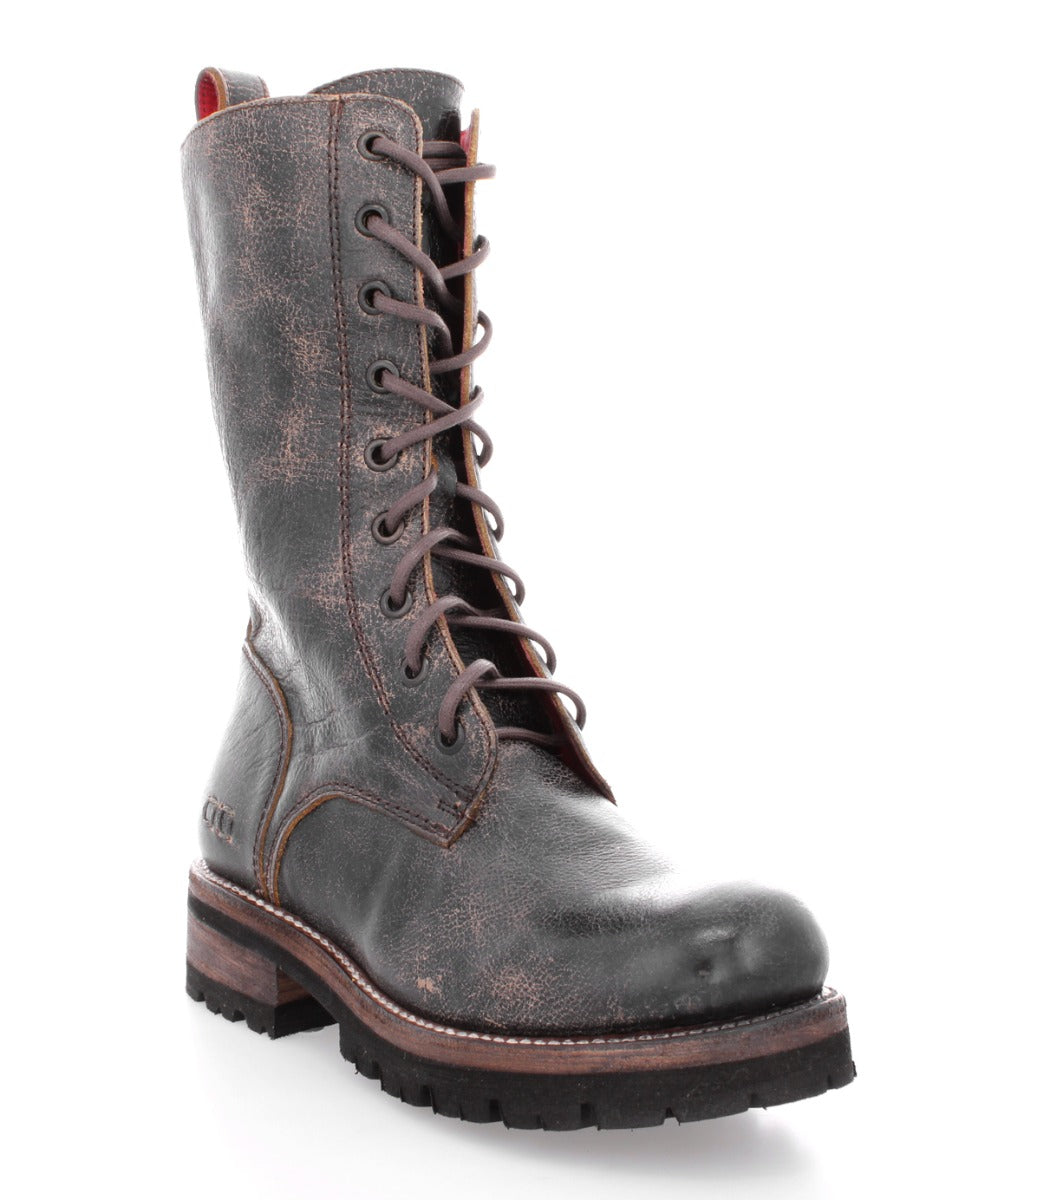 A women's grey Posh combat boot with laces by Bed Stu.